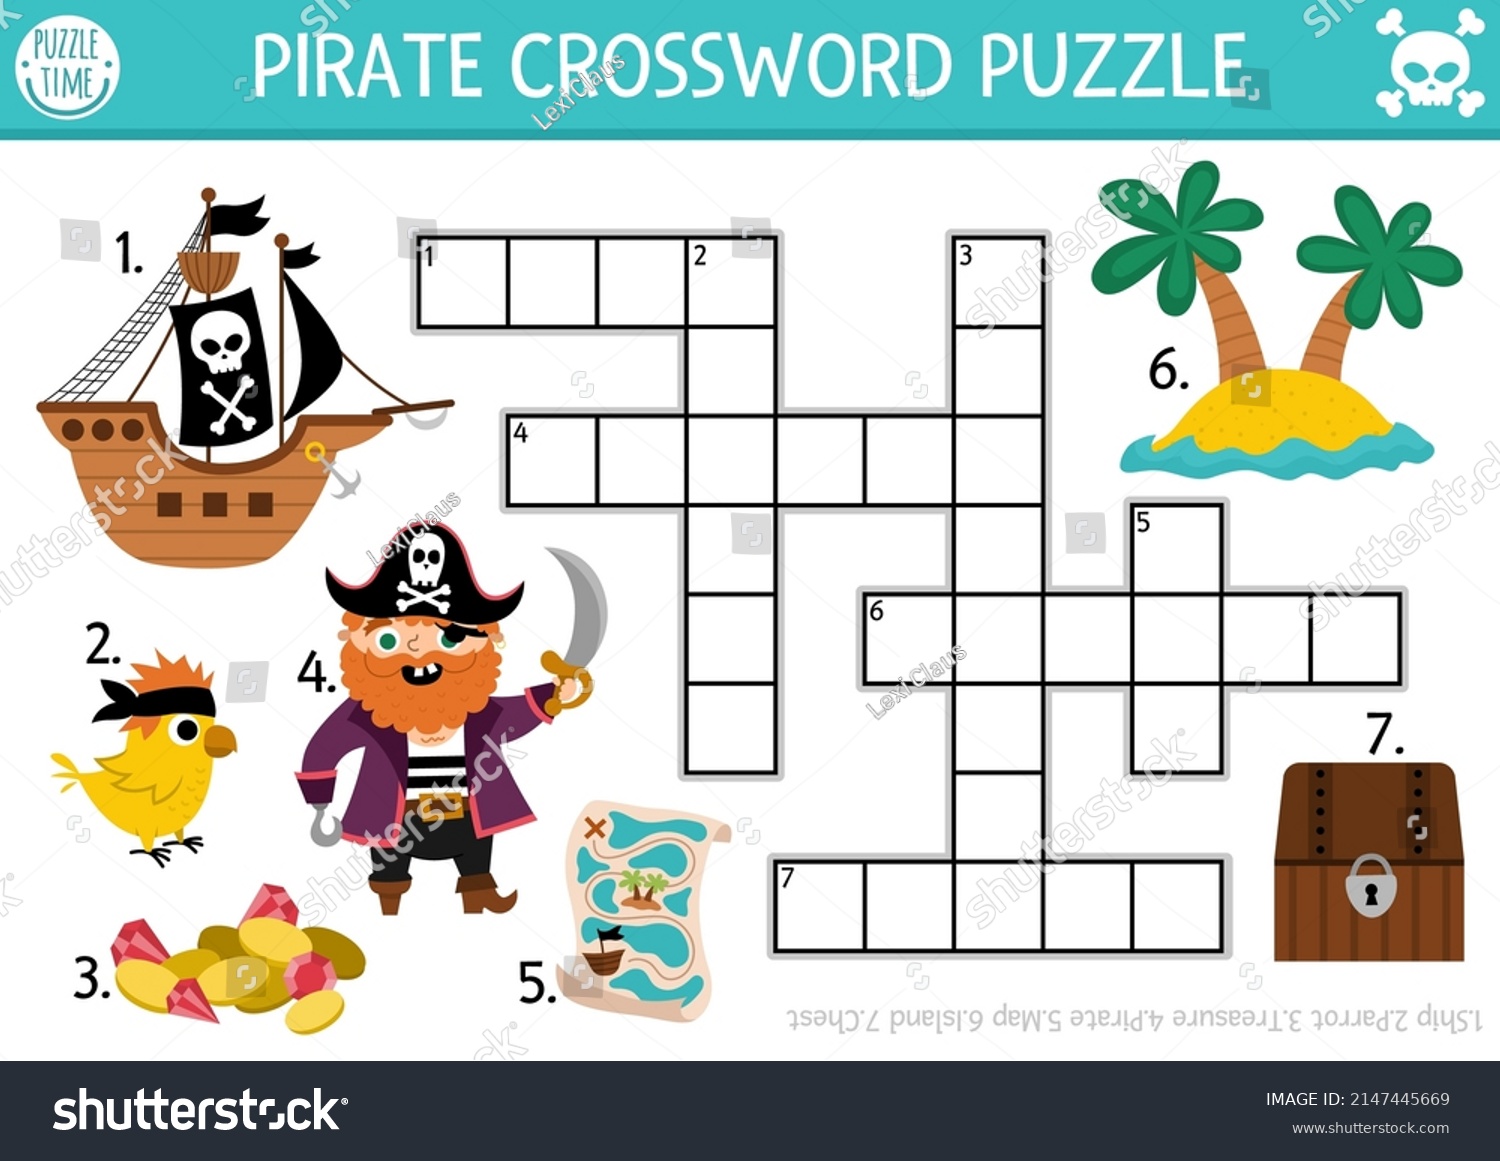 Pirate crossword images stock photos d objects vectors